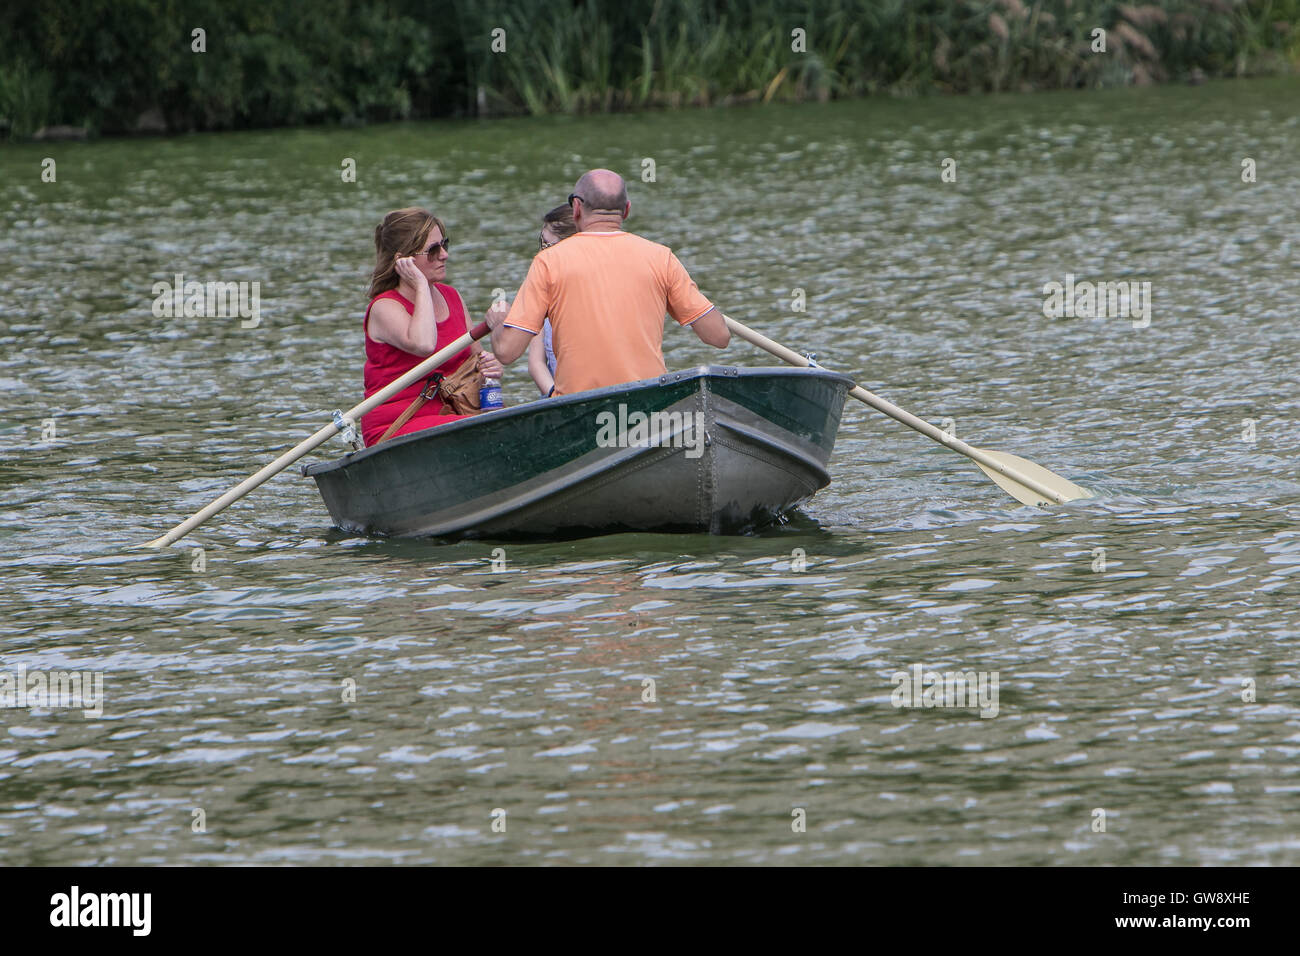 A family is boating in Central Park. Stock Photo